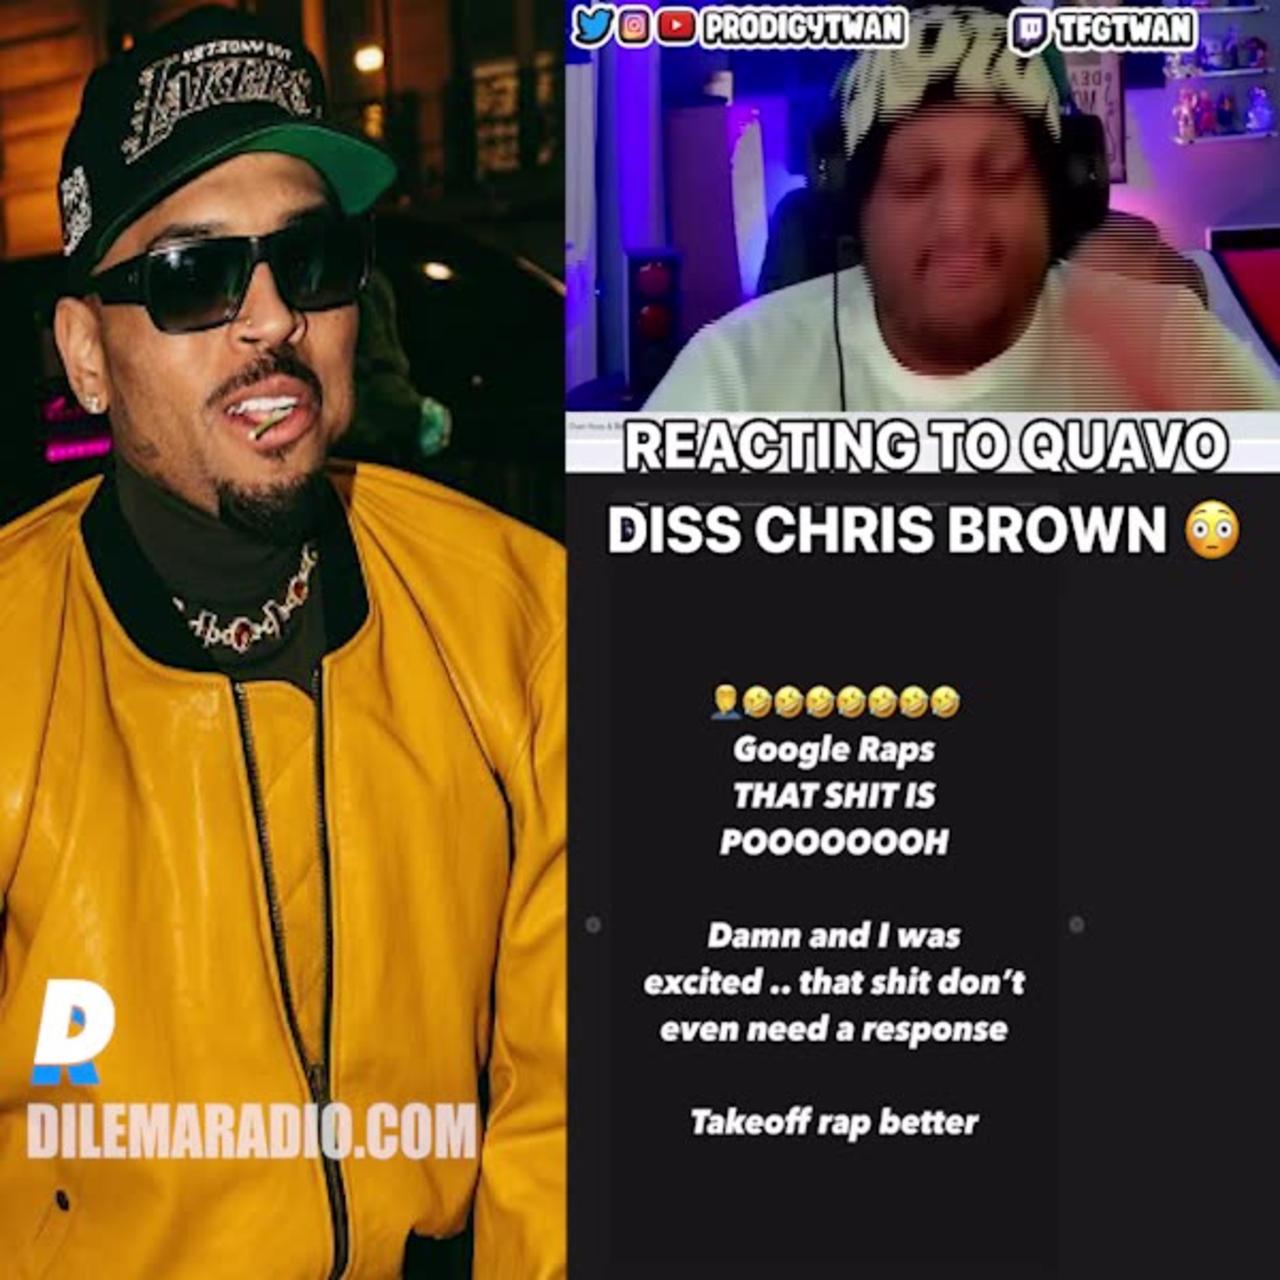 Chris Brown reacts to Quavo's diss track